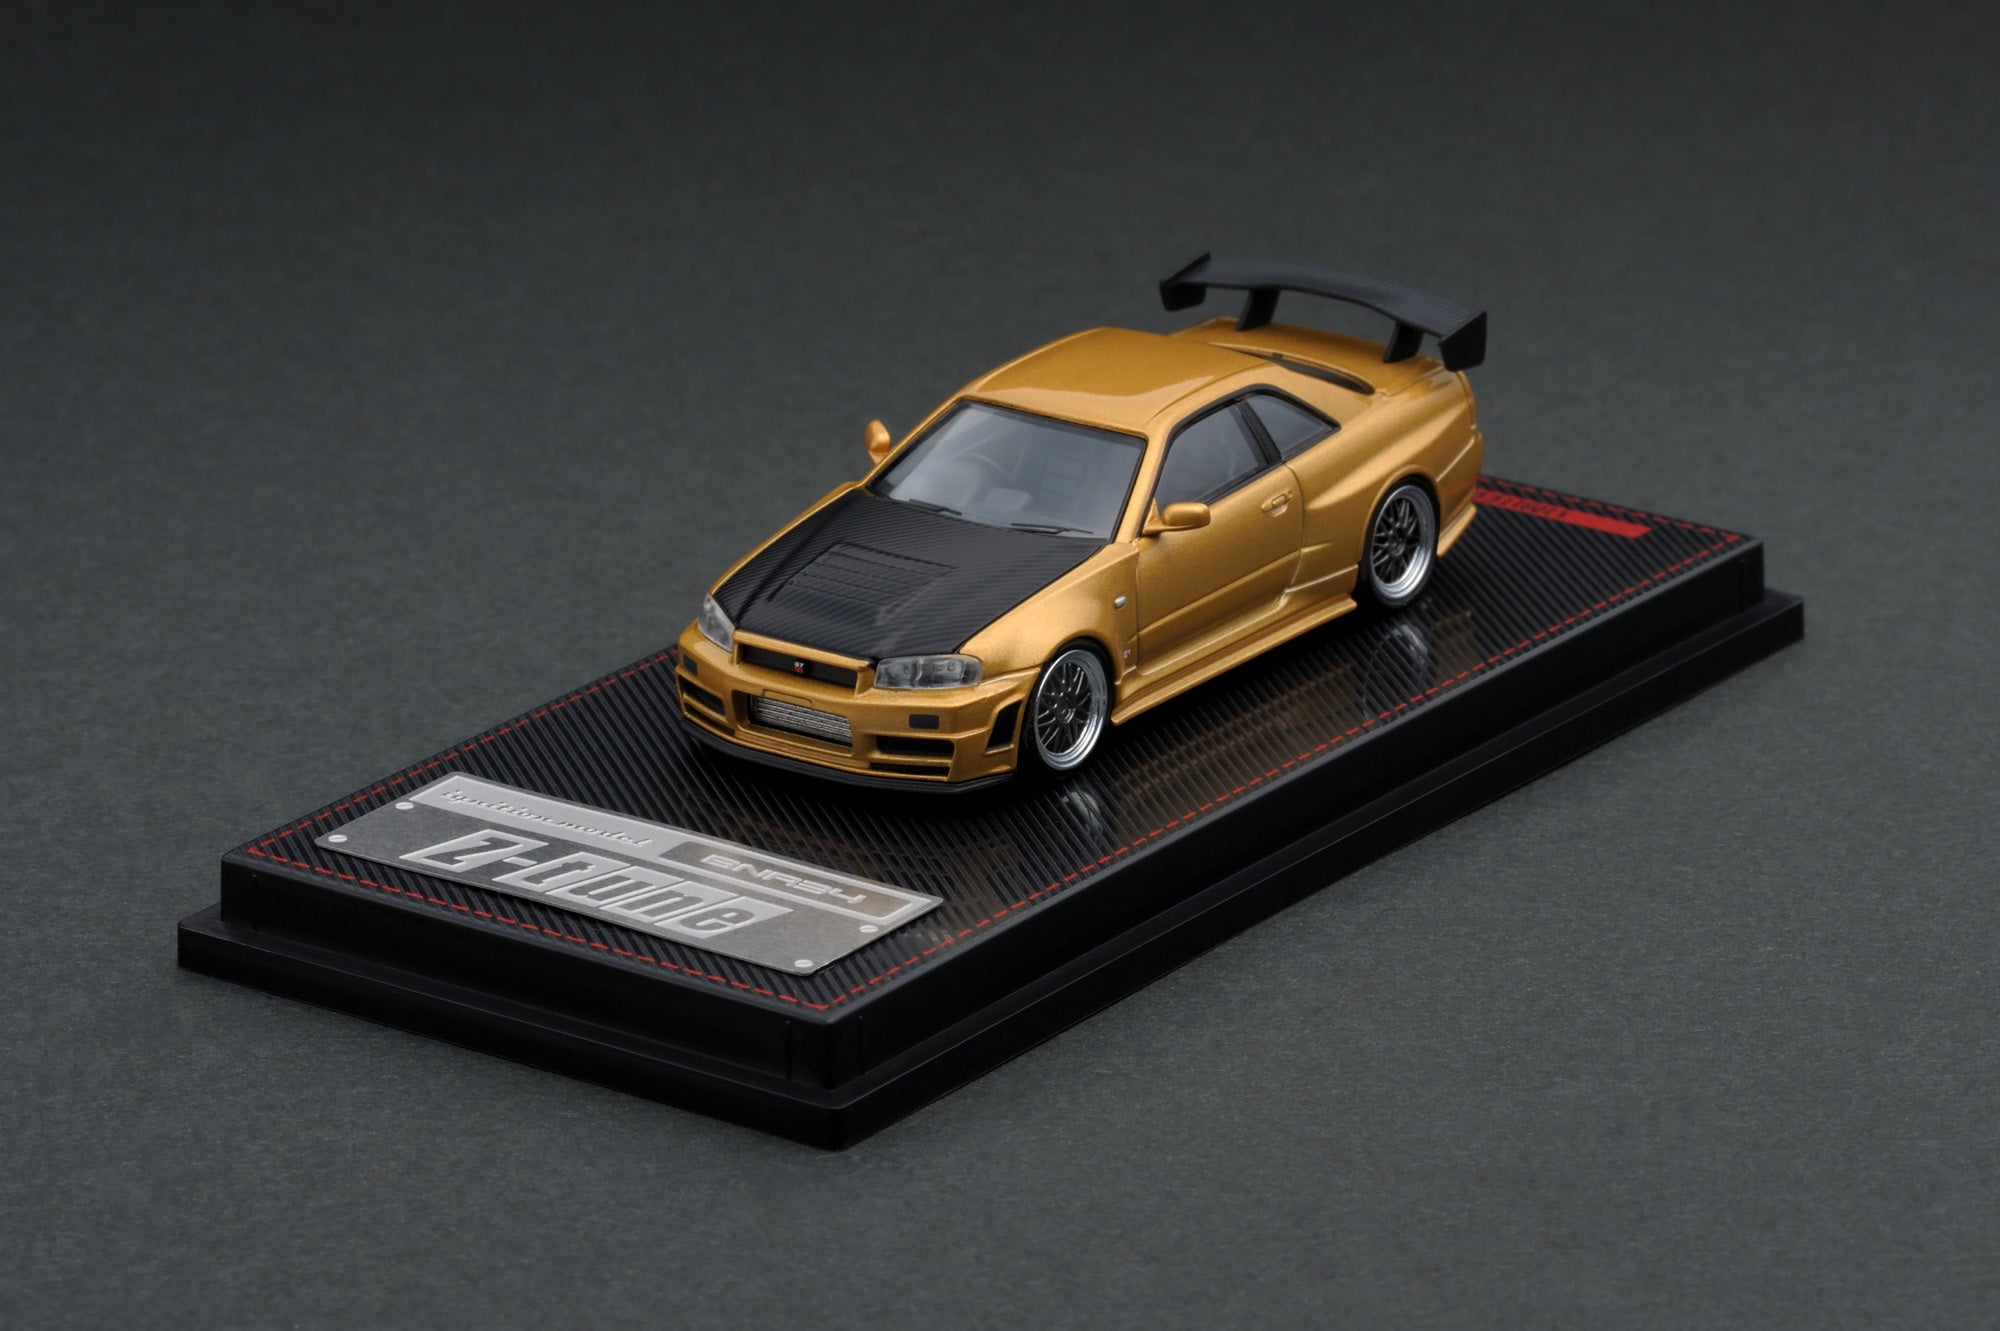 IG1875 Nismo R34 GT-R Z-tune Gold – ignition model